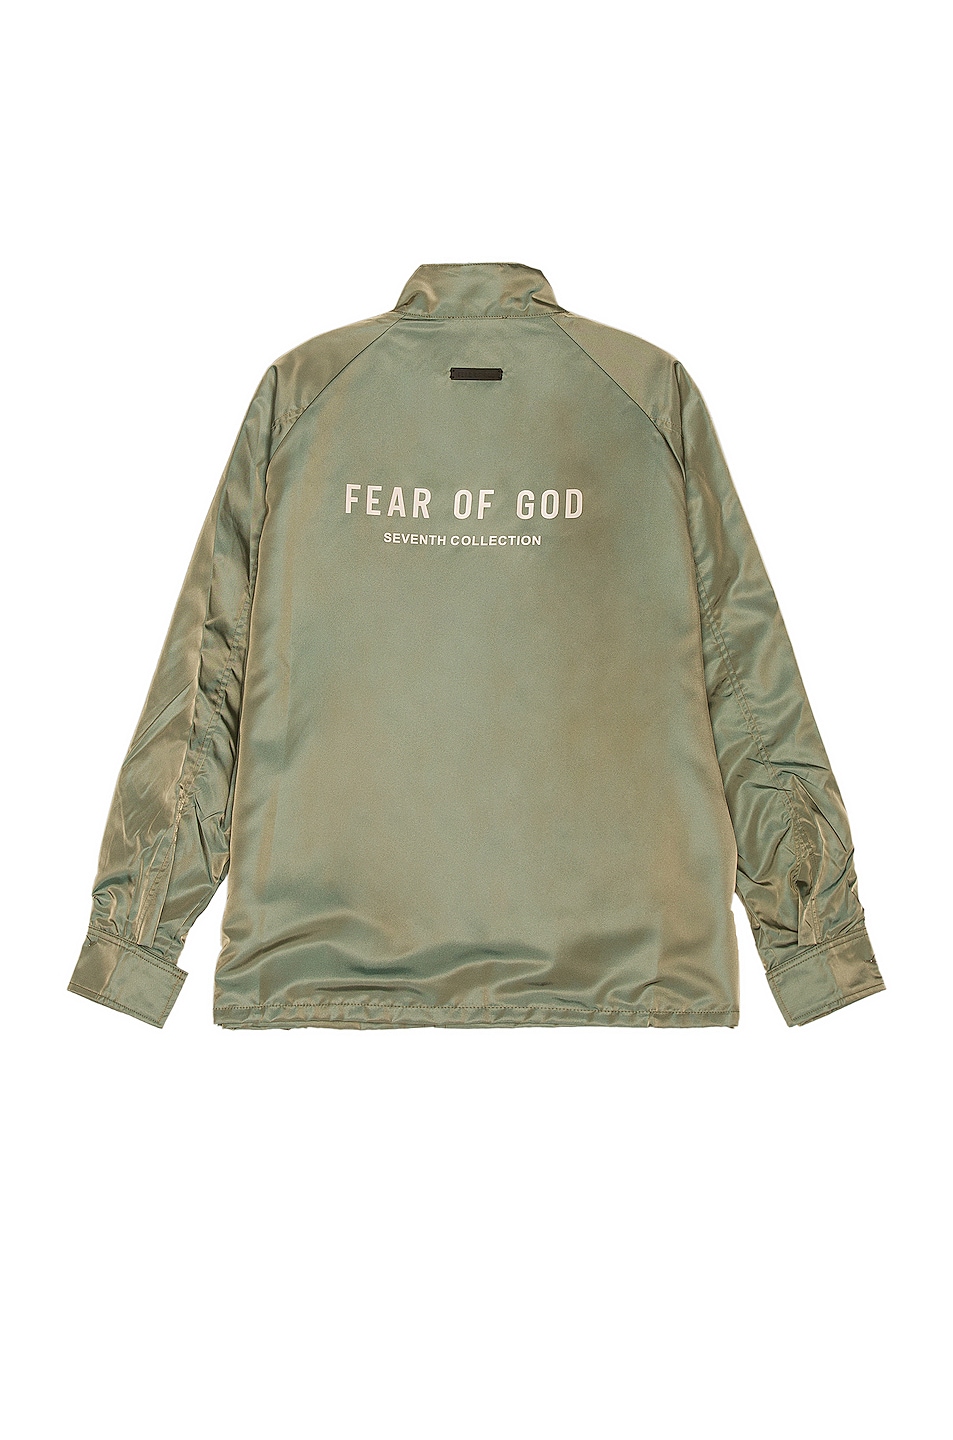 Image 1 of Fear of God Souvenir Jacket in Green Iridescent